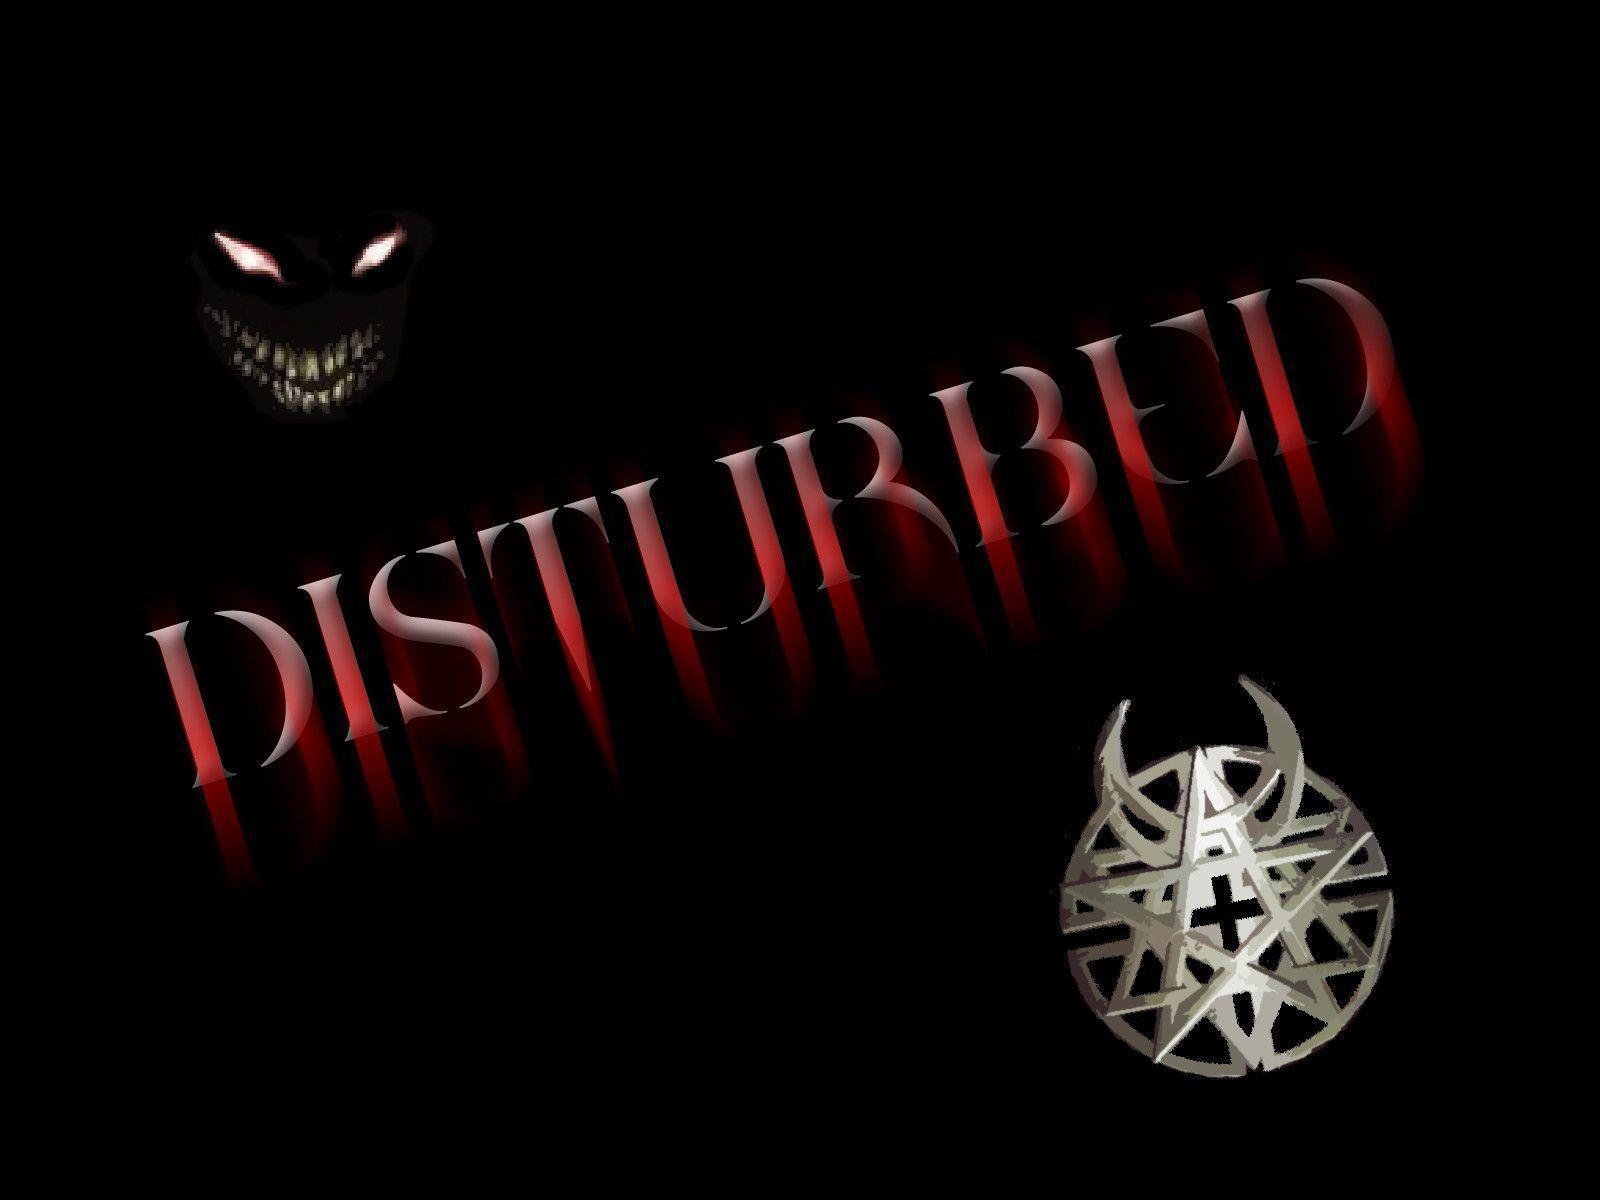 Disturbed Ten Thousand Fists Wallpapers